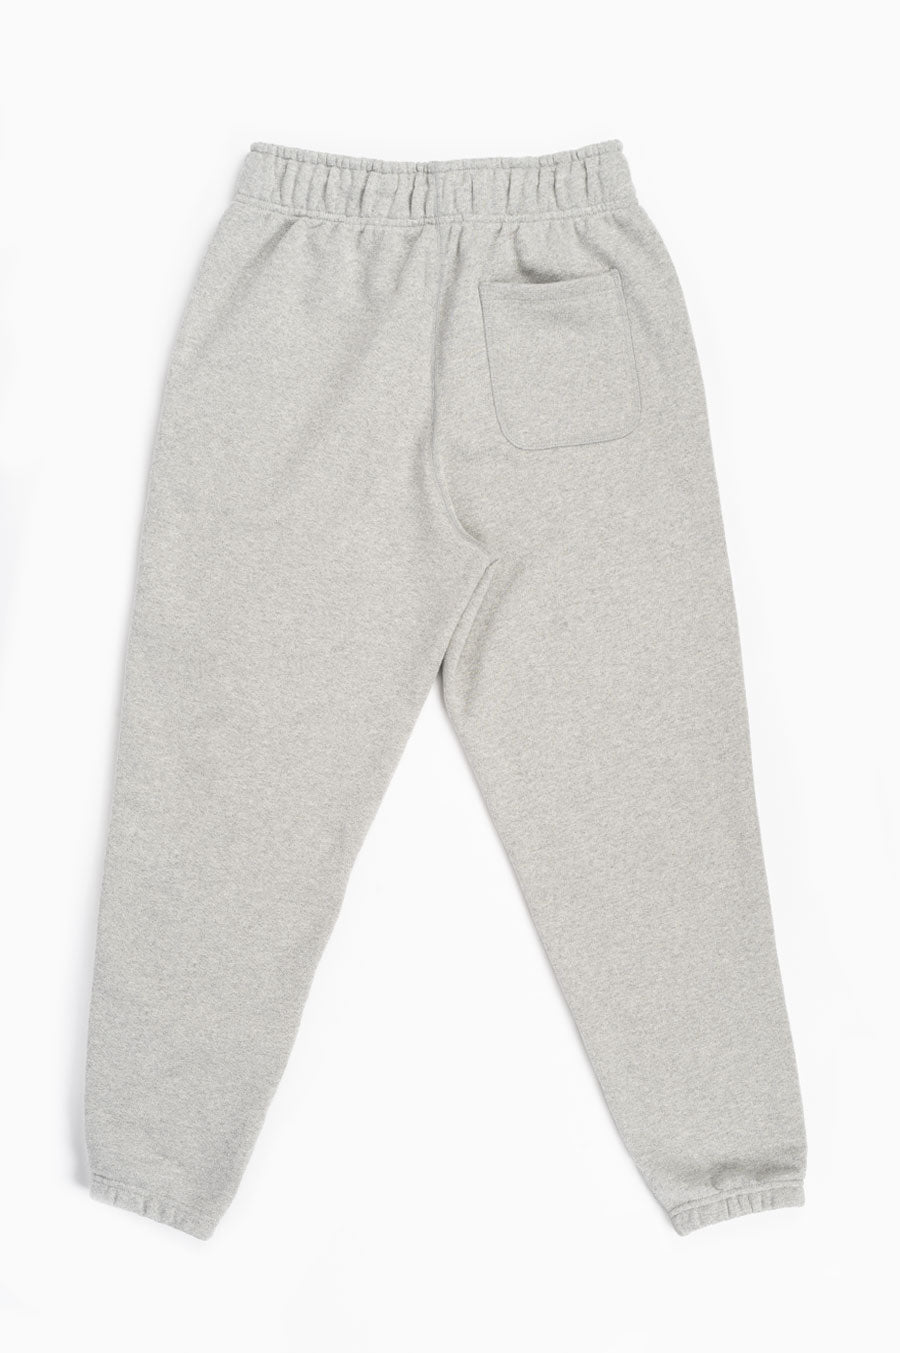 NEW BALANCE MADE IN USA SWEATPANT ATHLETIC GREY – BLENDS